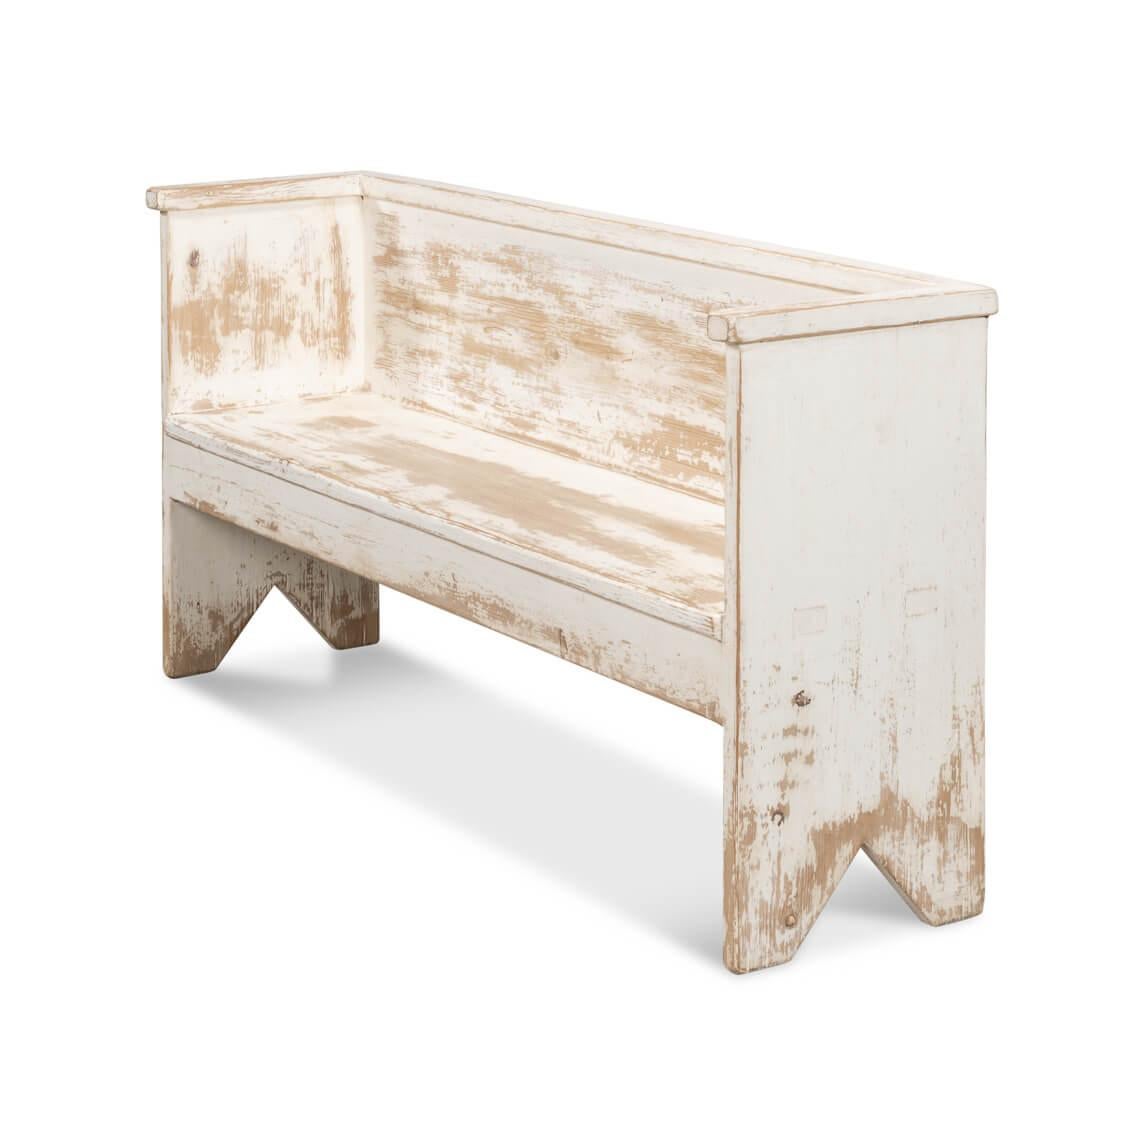 Country Rustic White Painted Bench For Sale